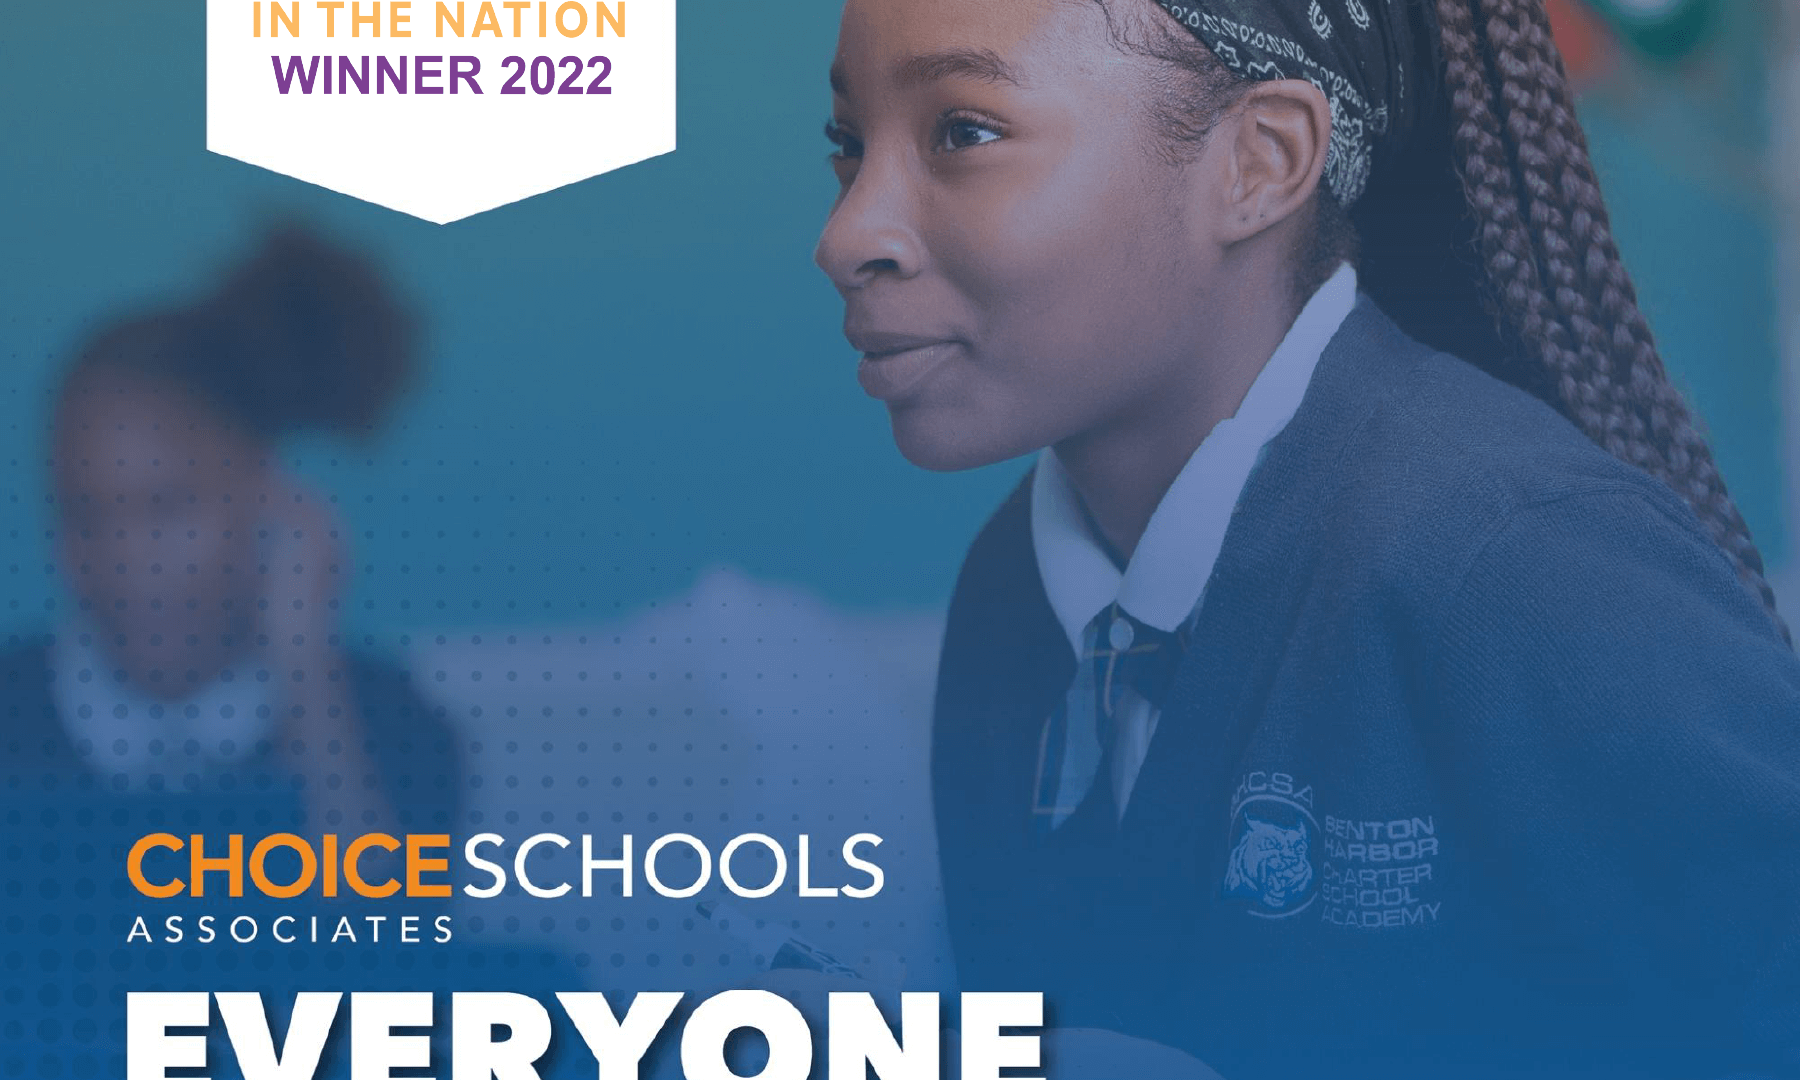 Image celebrating Choice Schools Associates award for the 2022 Best and Brightest Companies to Work For